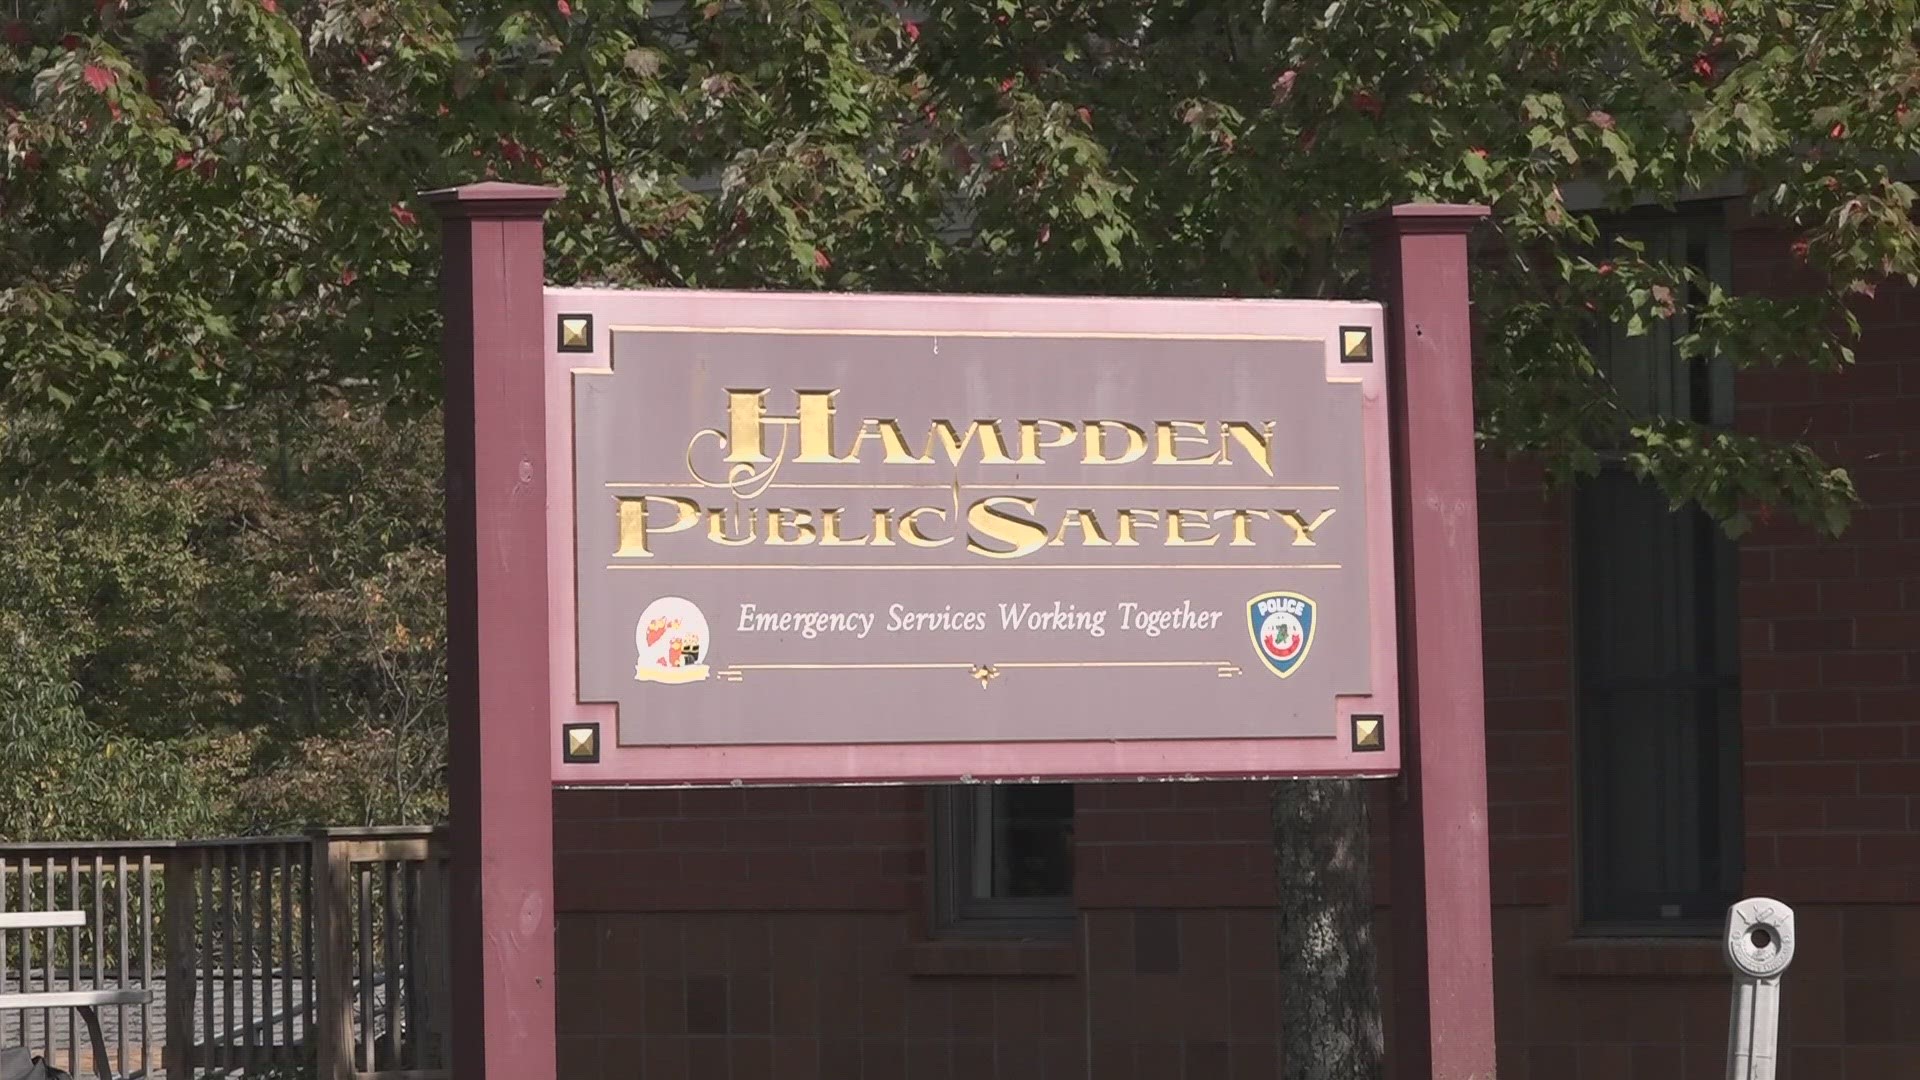 The child was hospitalized after leaving an enclosed playground at his preschool, police said.